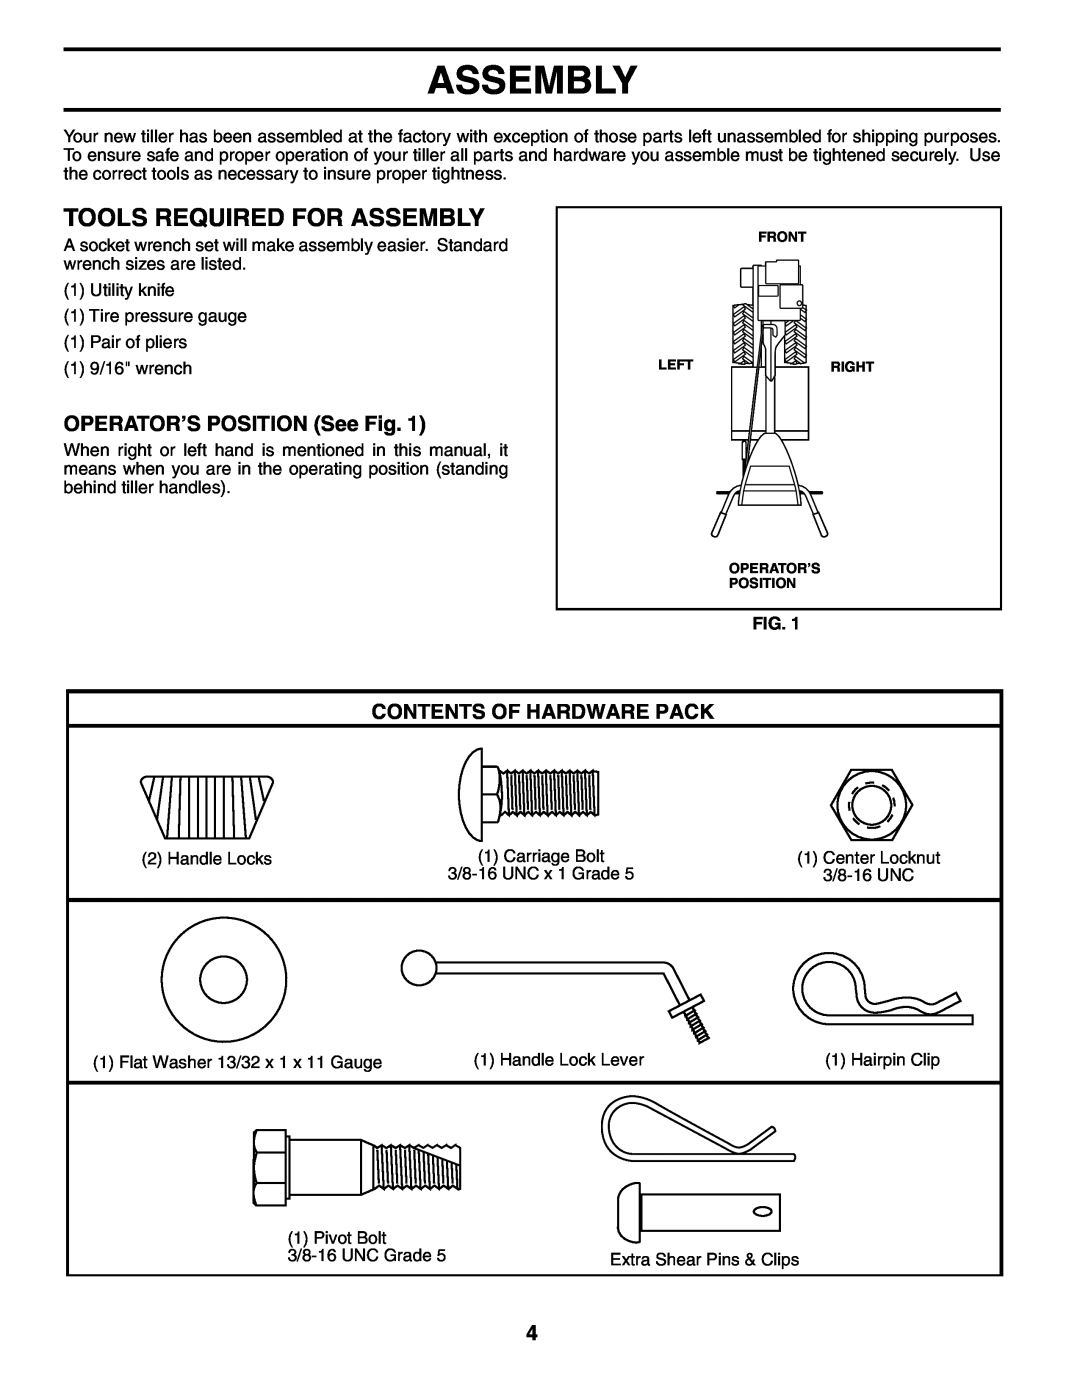 Poulan PRRT65D owner manual Tools Required For Assembly, OPERATOR’S POSITION See Fig, Contents Of Hardware Pack 